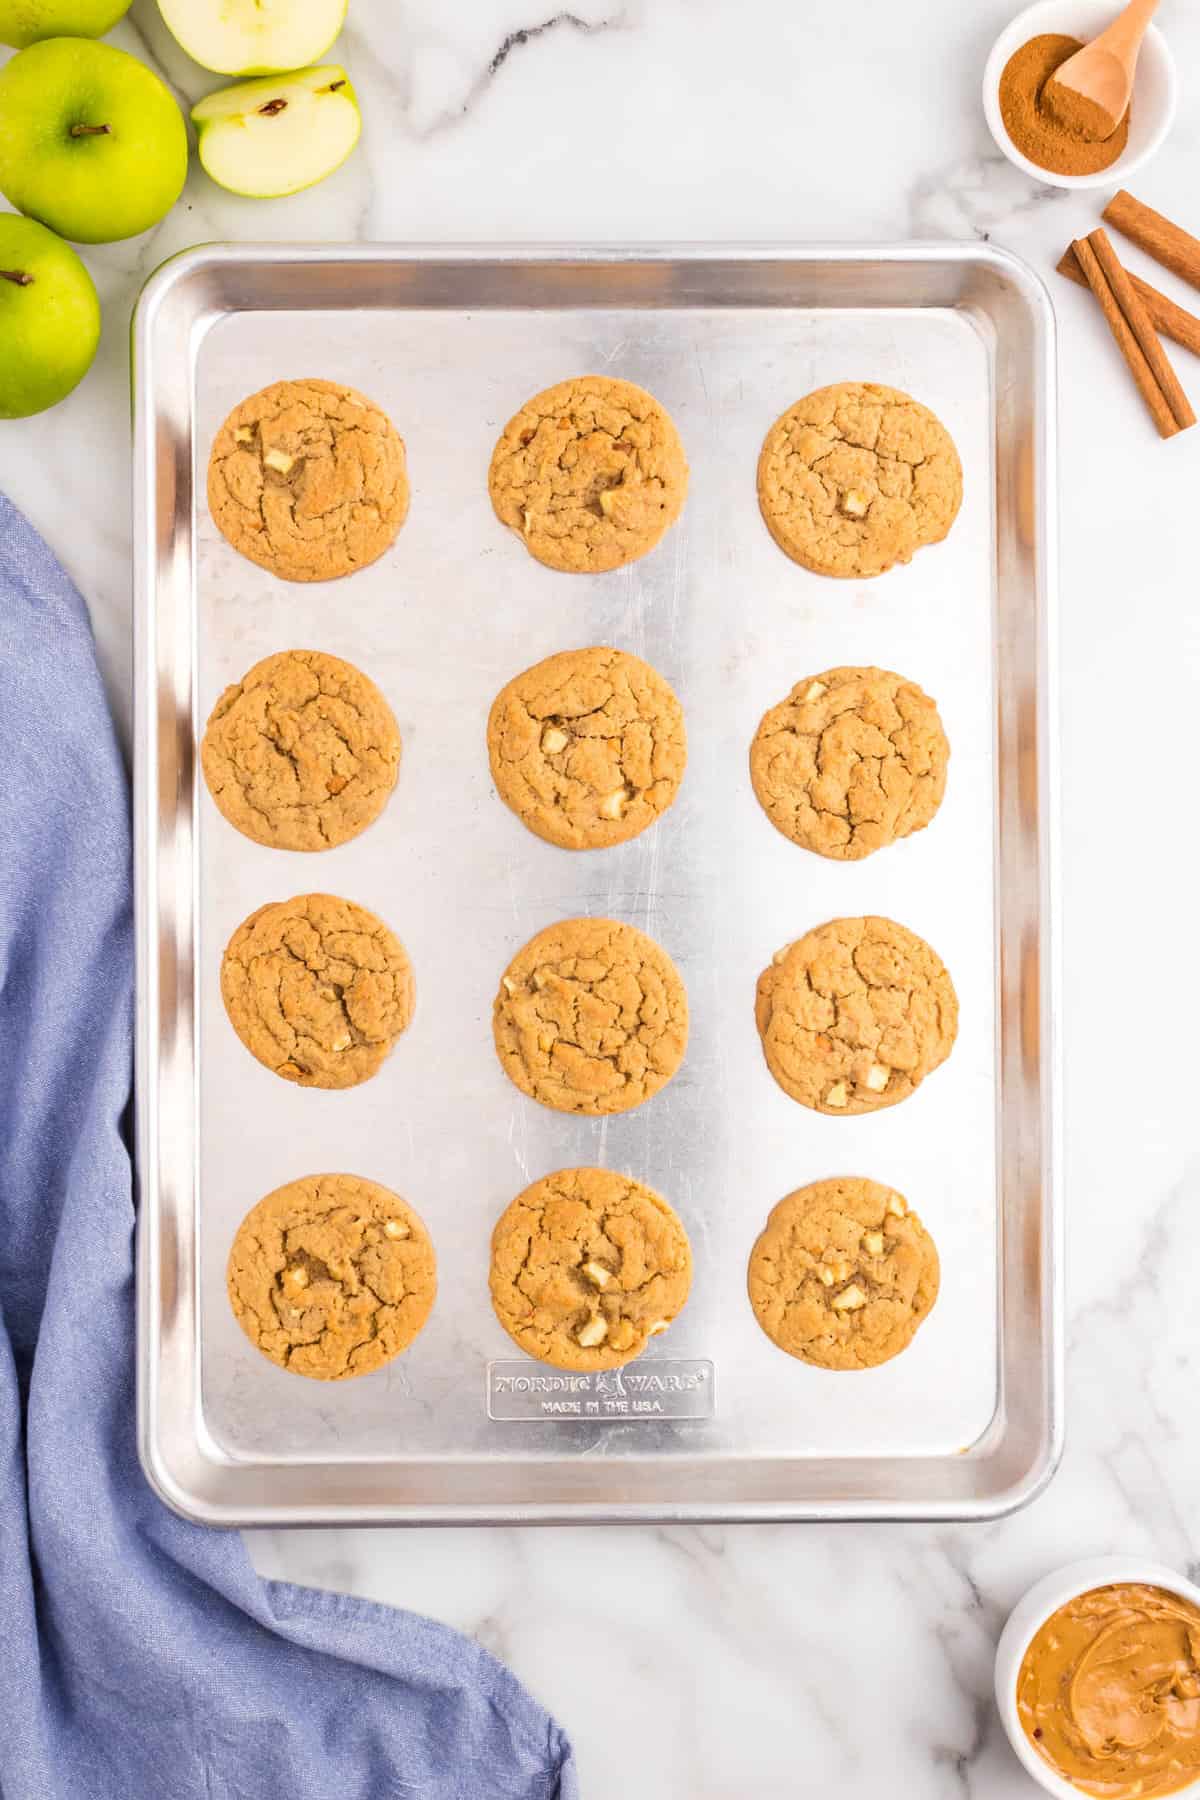 Apple Peanut Butter Cookies baked to a golden brown on a cookie sheet